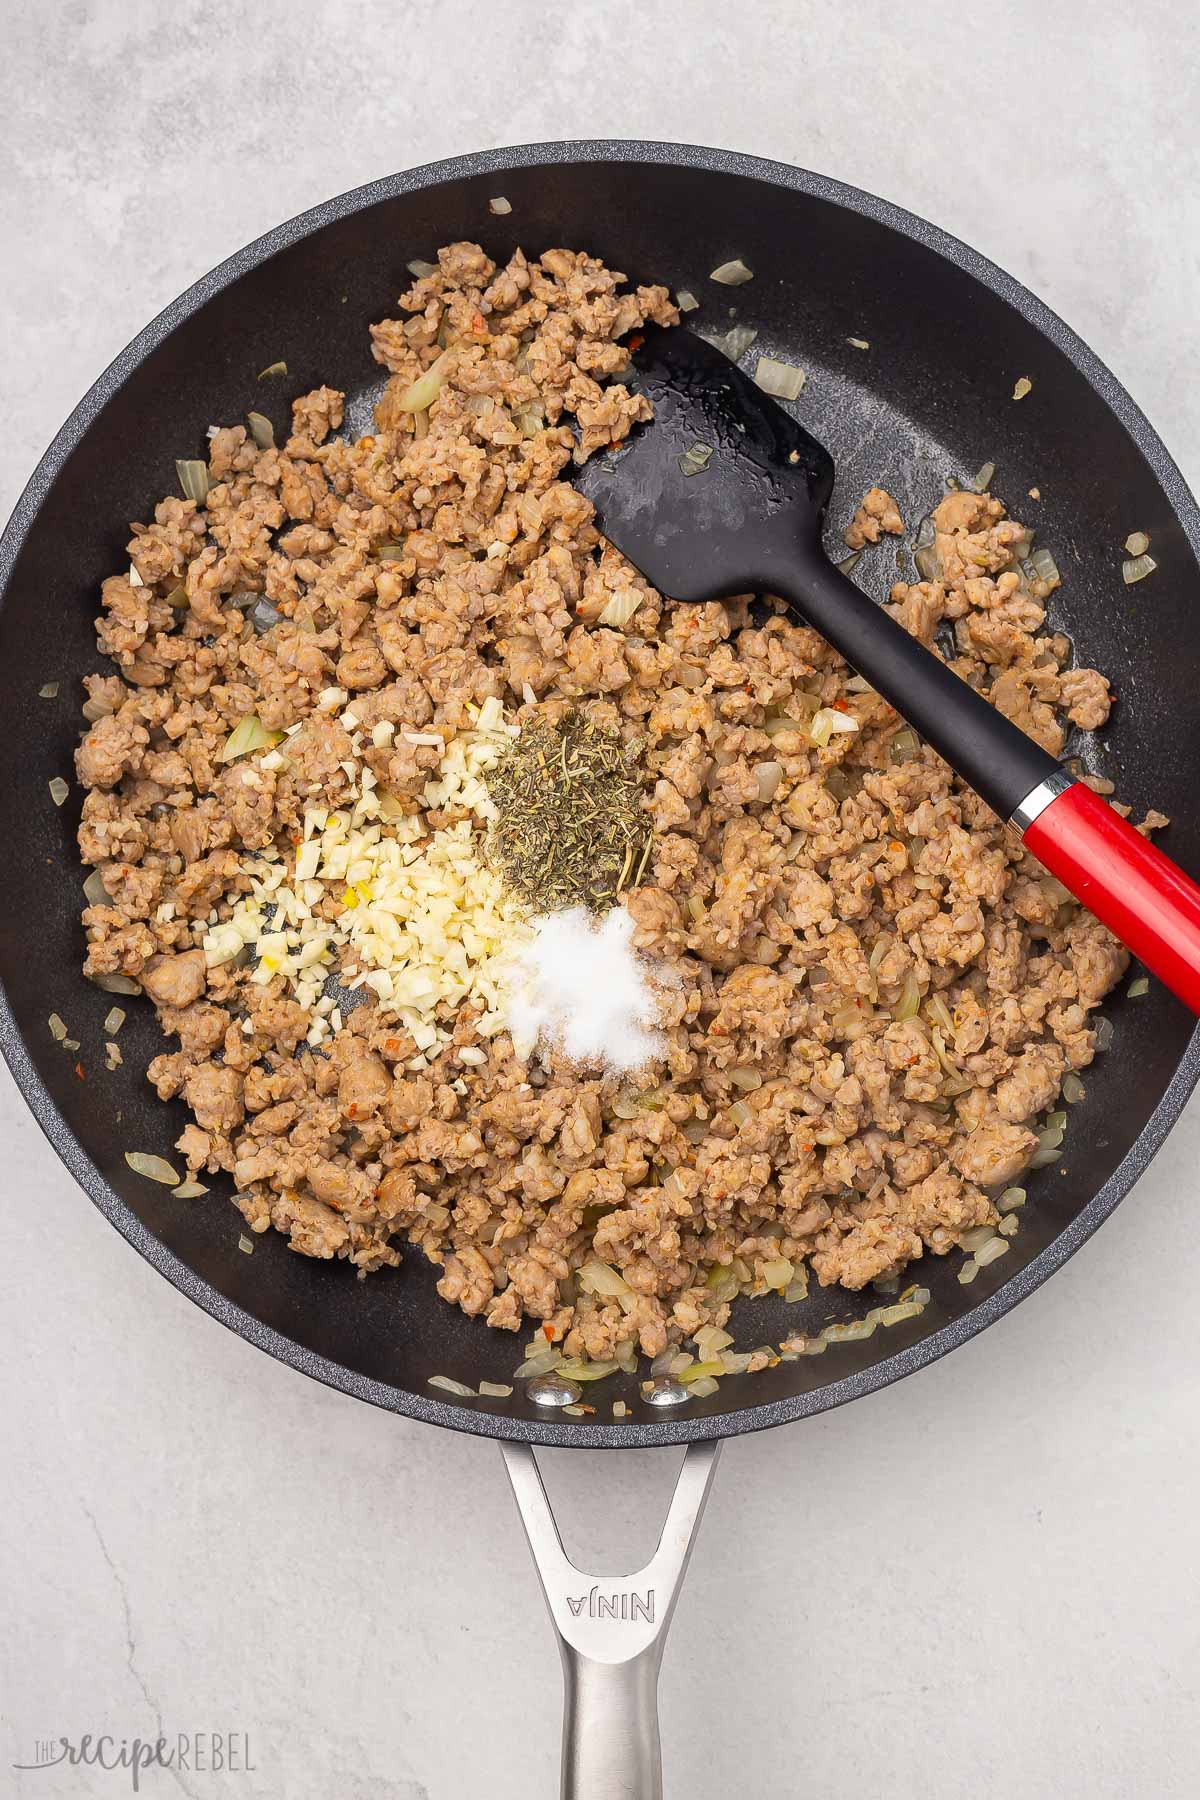 fried ground meat in a black frying pan with spices on top.